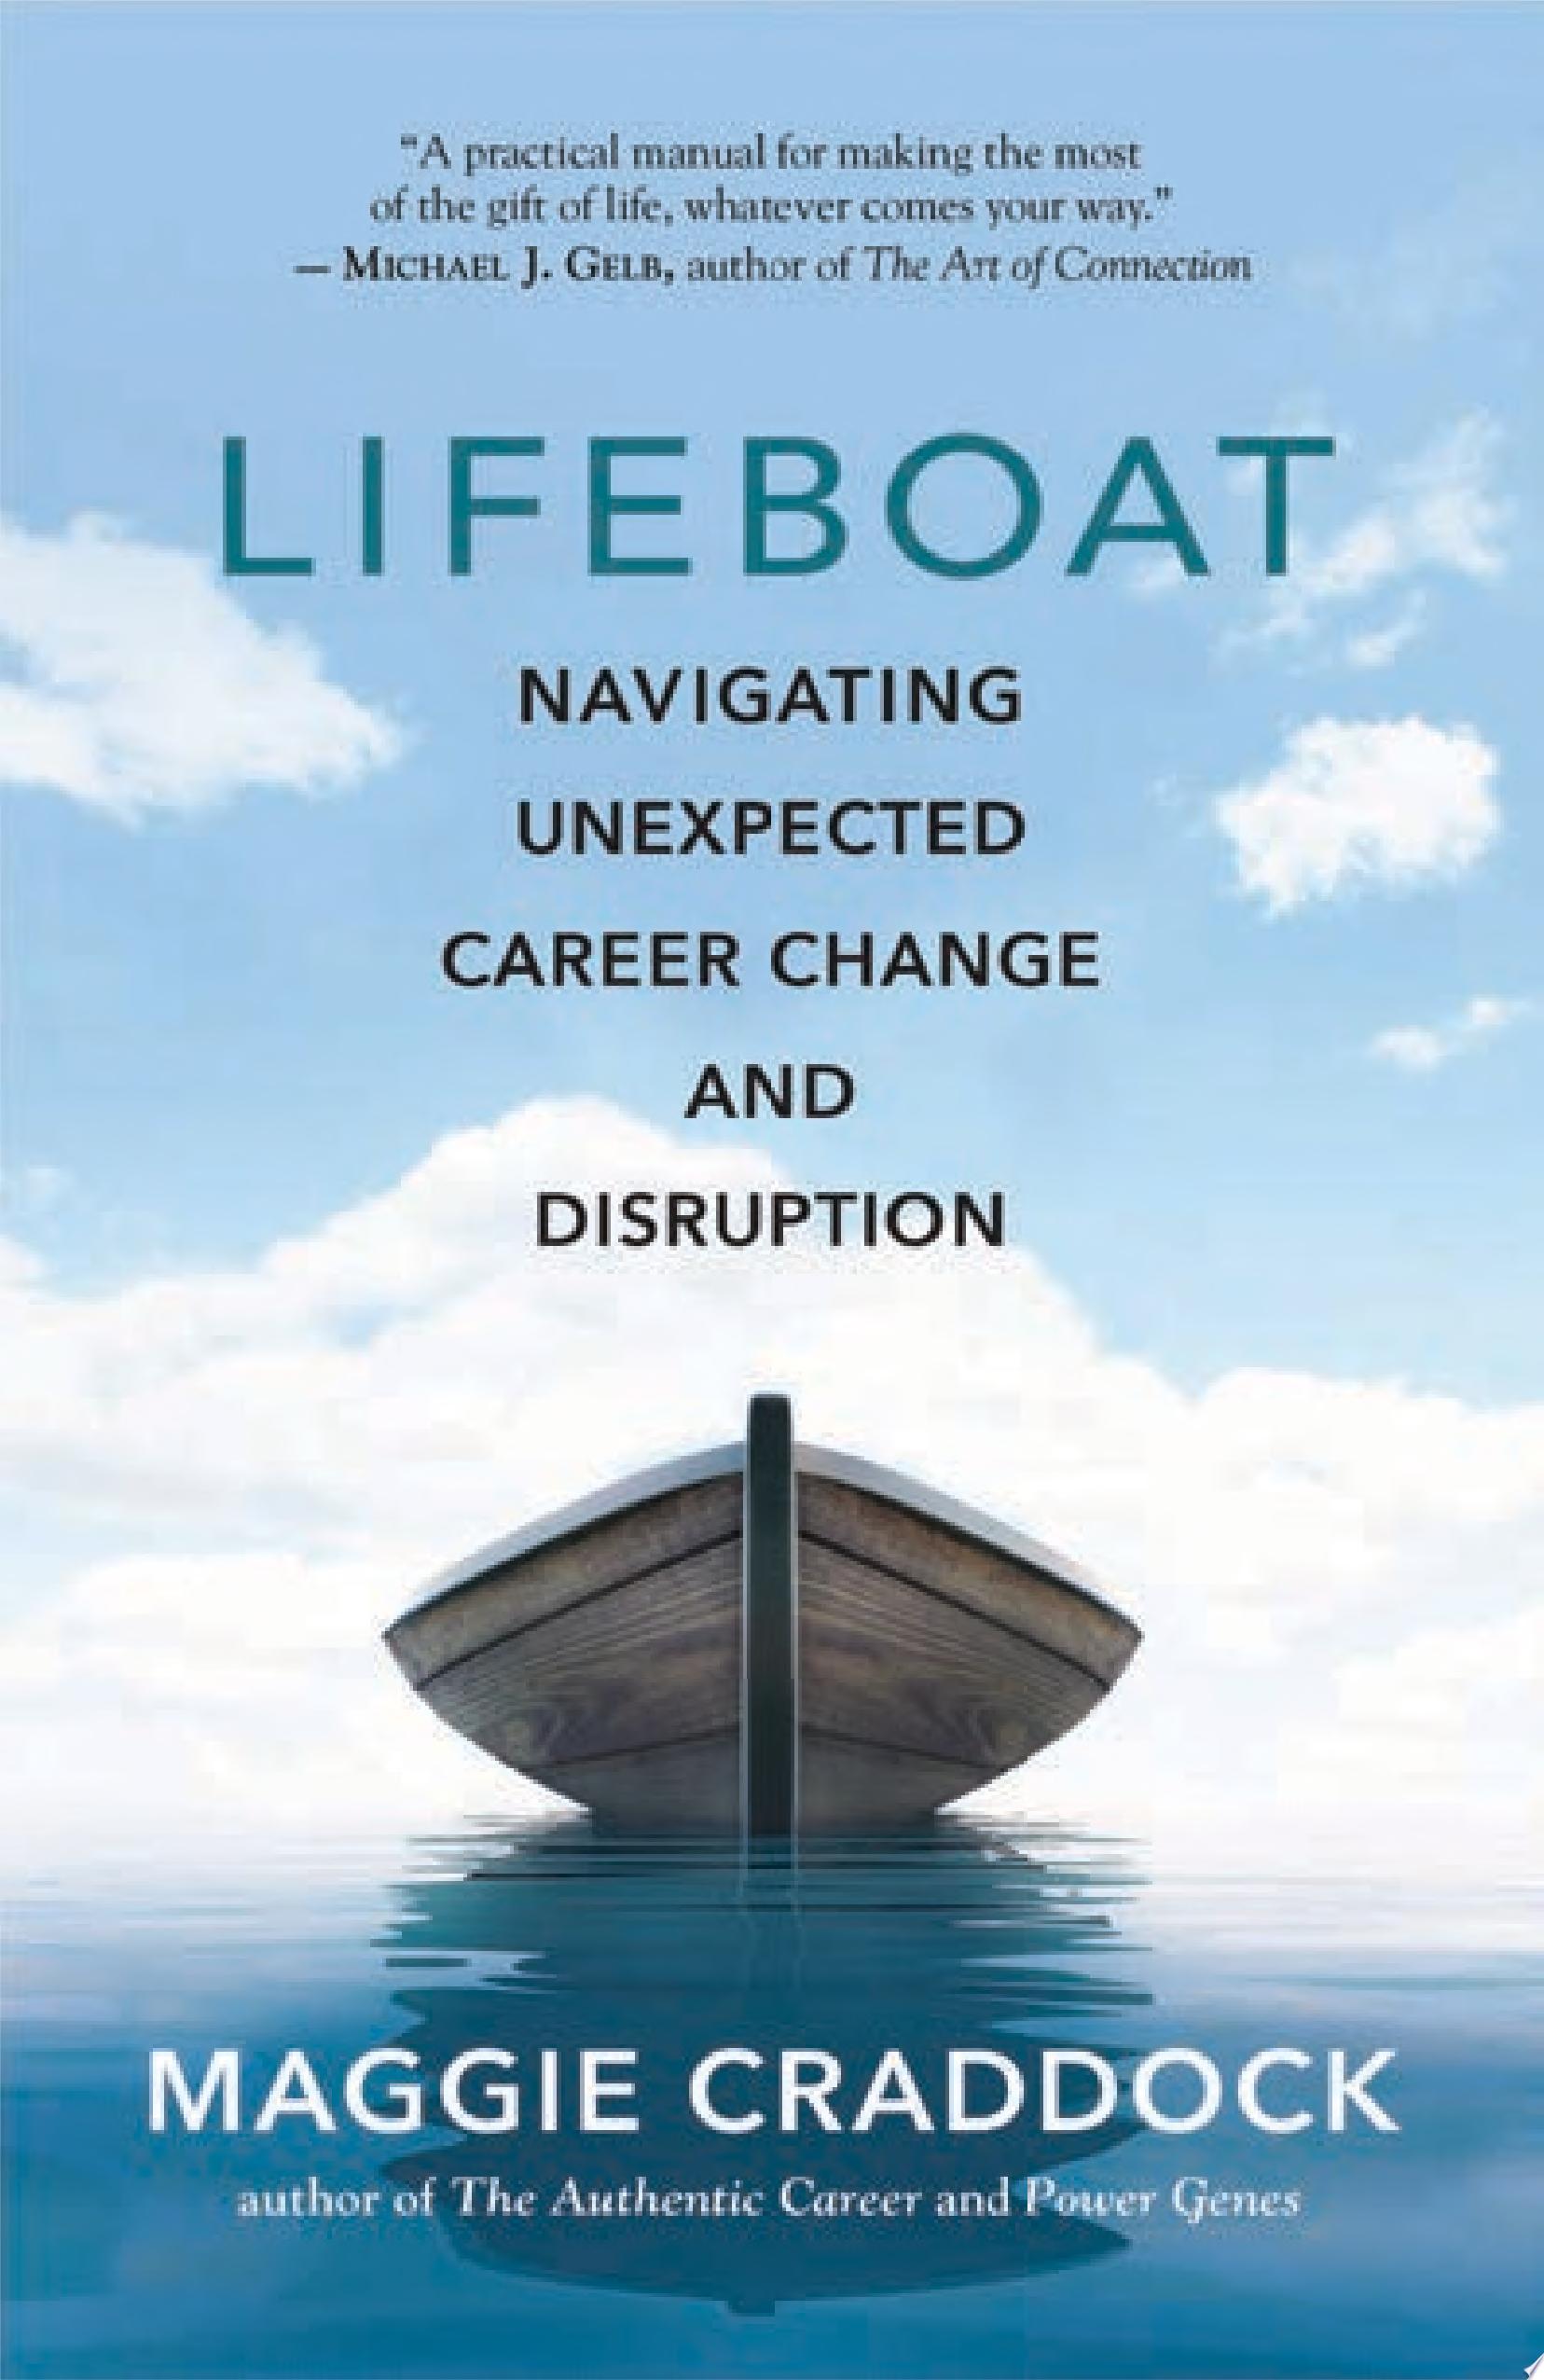 Image for "Lifeboat"